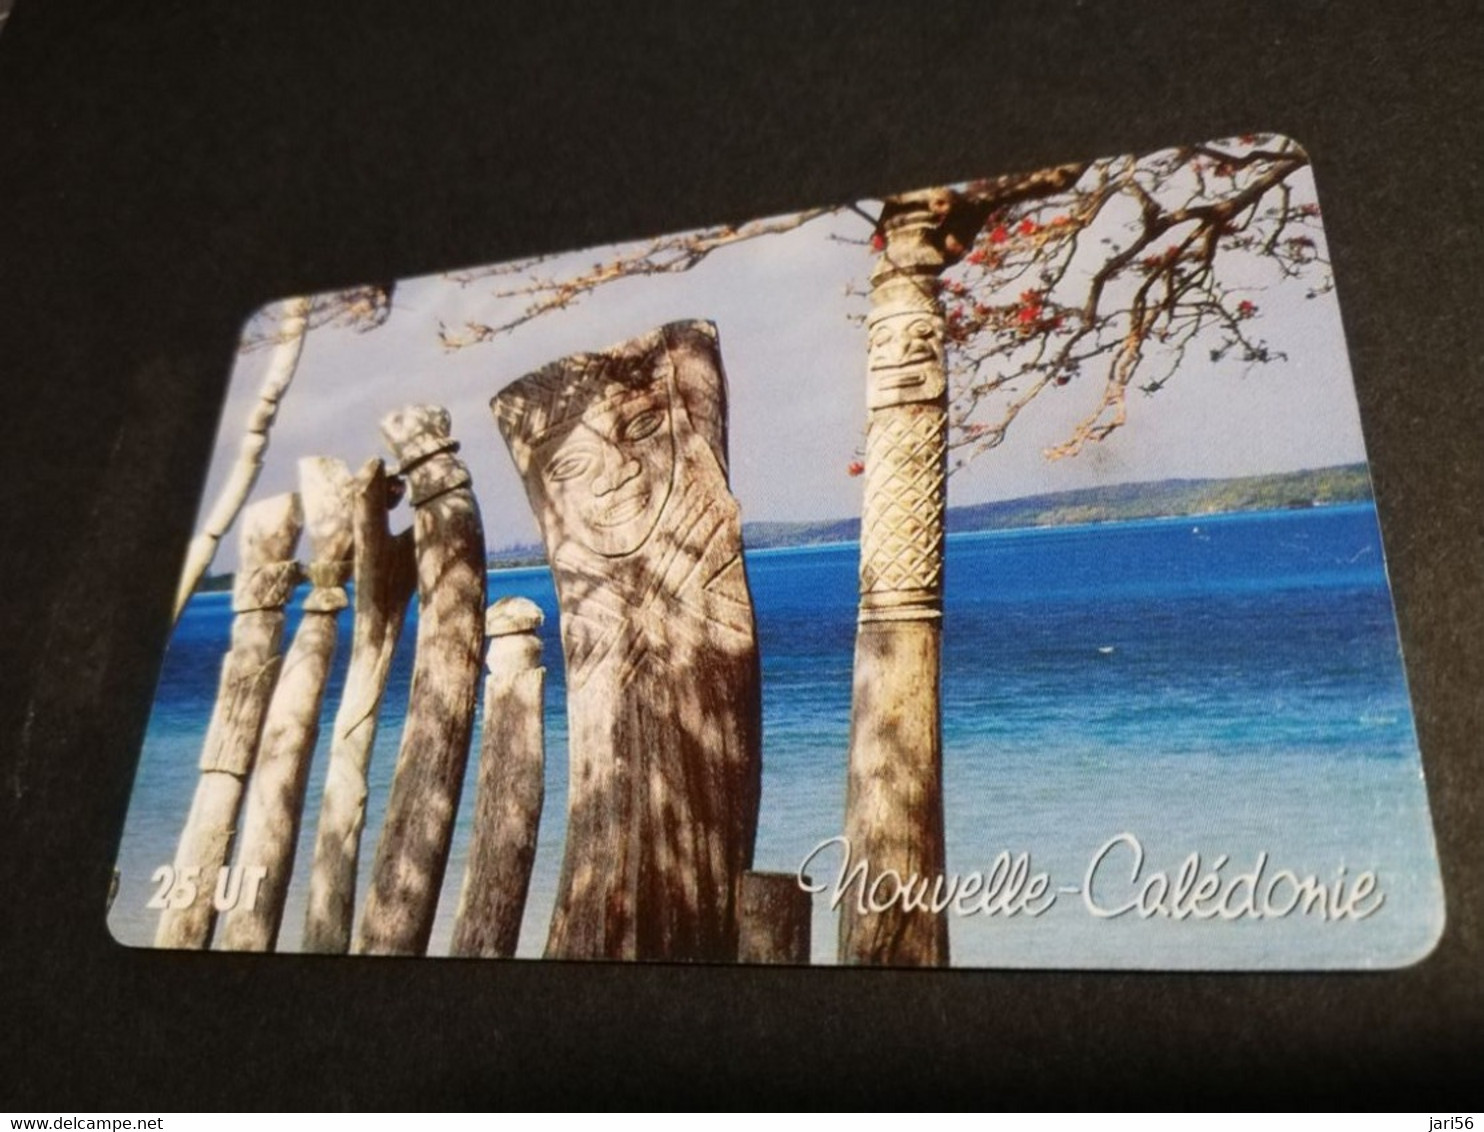 NOUVELLE CALEDONIA  CHIP CARD 25  UNITS  CARVED TREES AT BEACH         ** 4193 ** - Nueva Caledonia